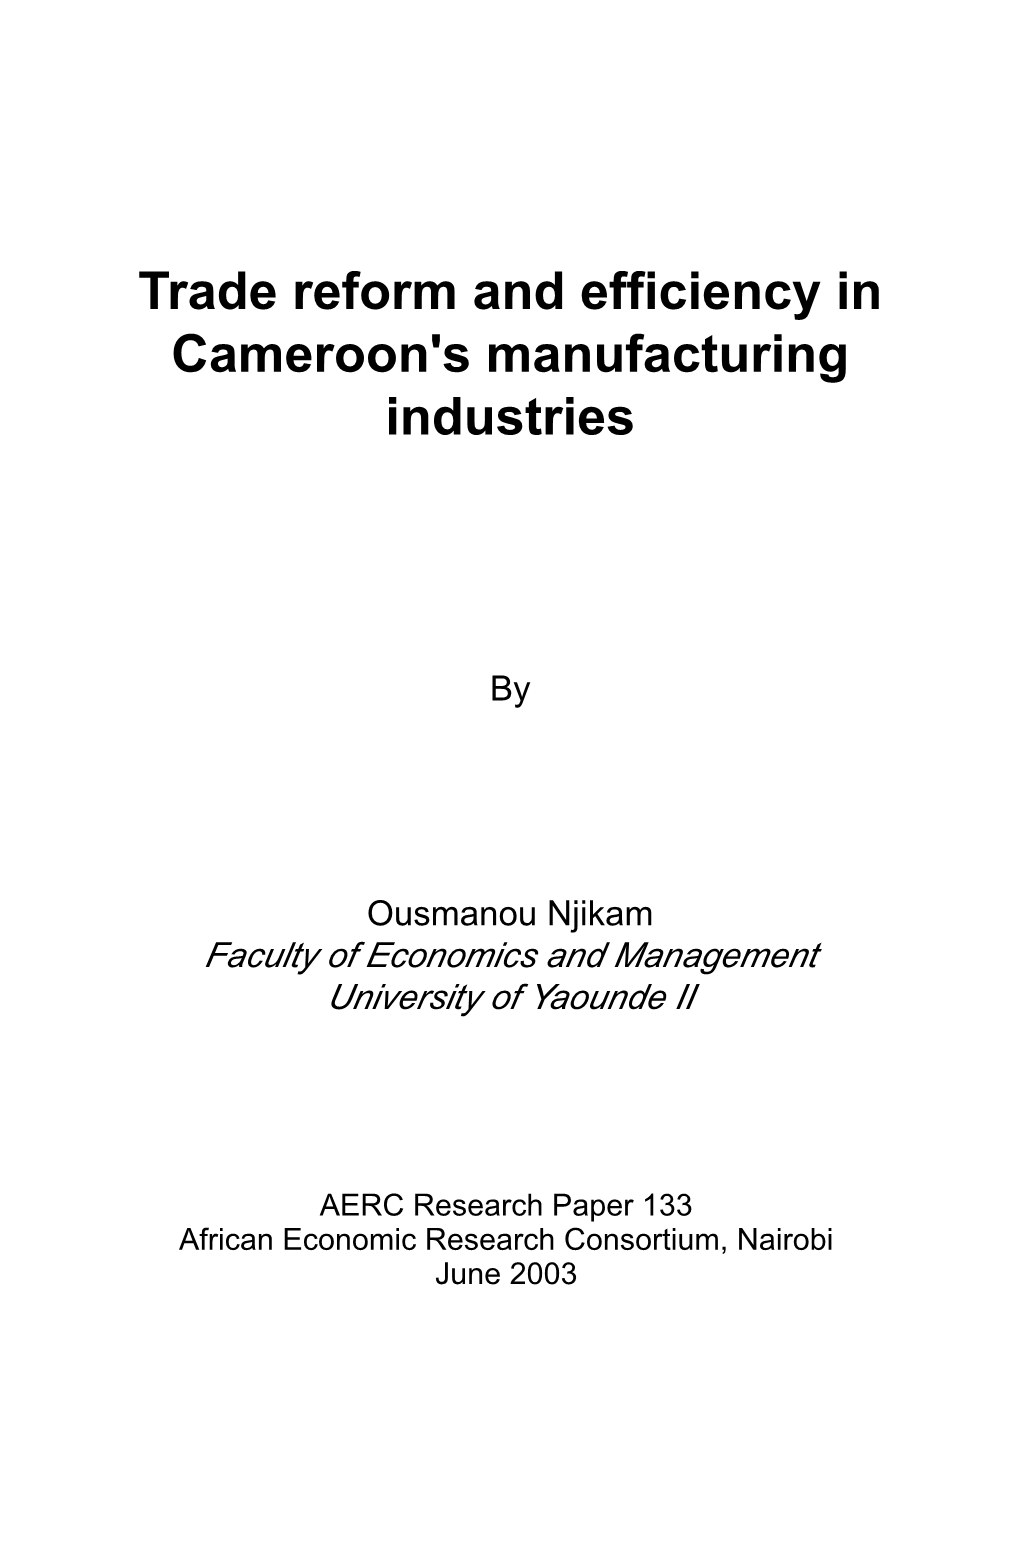 Trade Reform and Efficiency in Cameroon's Manufacturing Industries